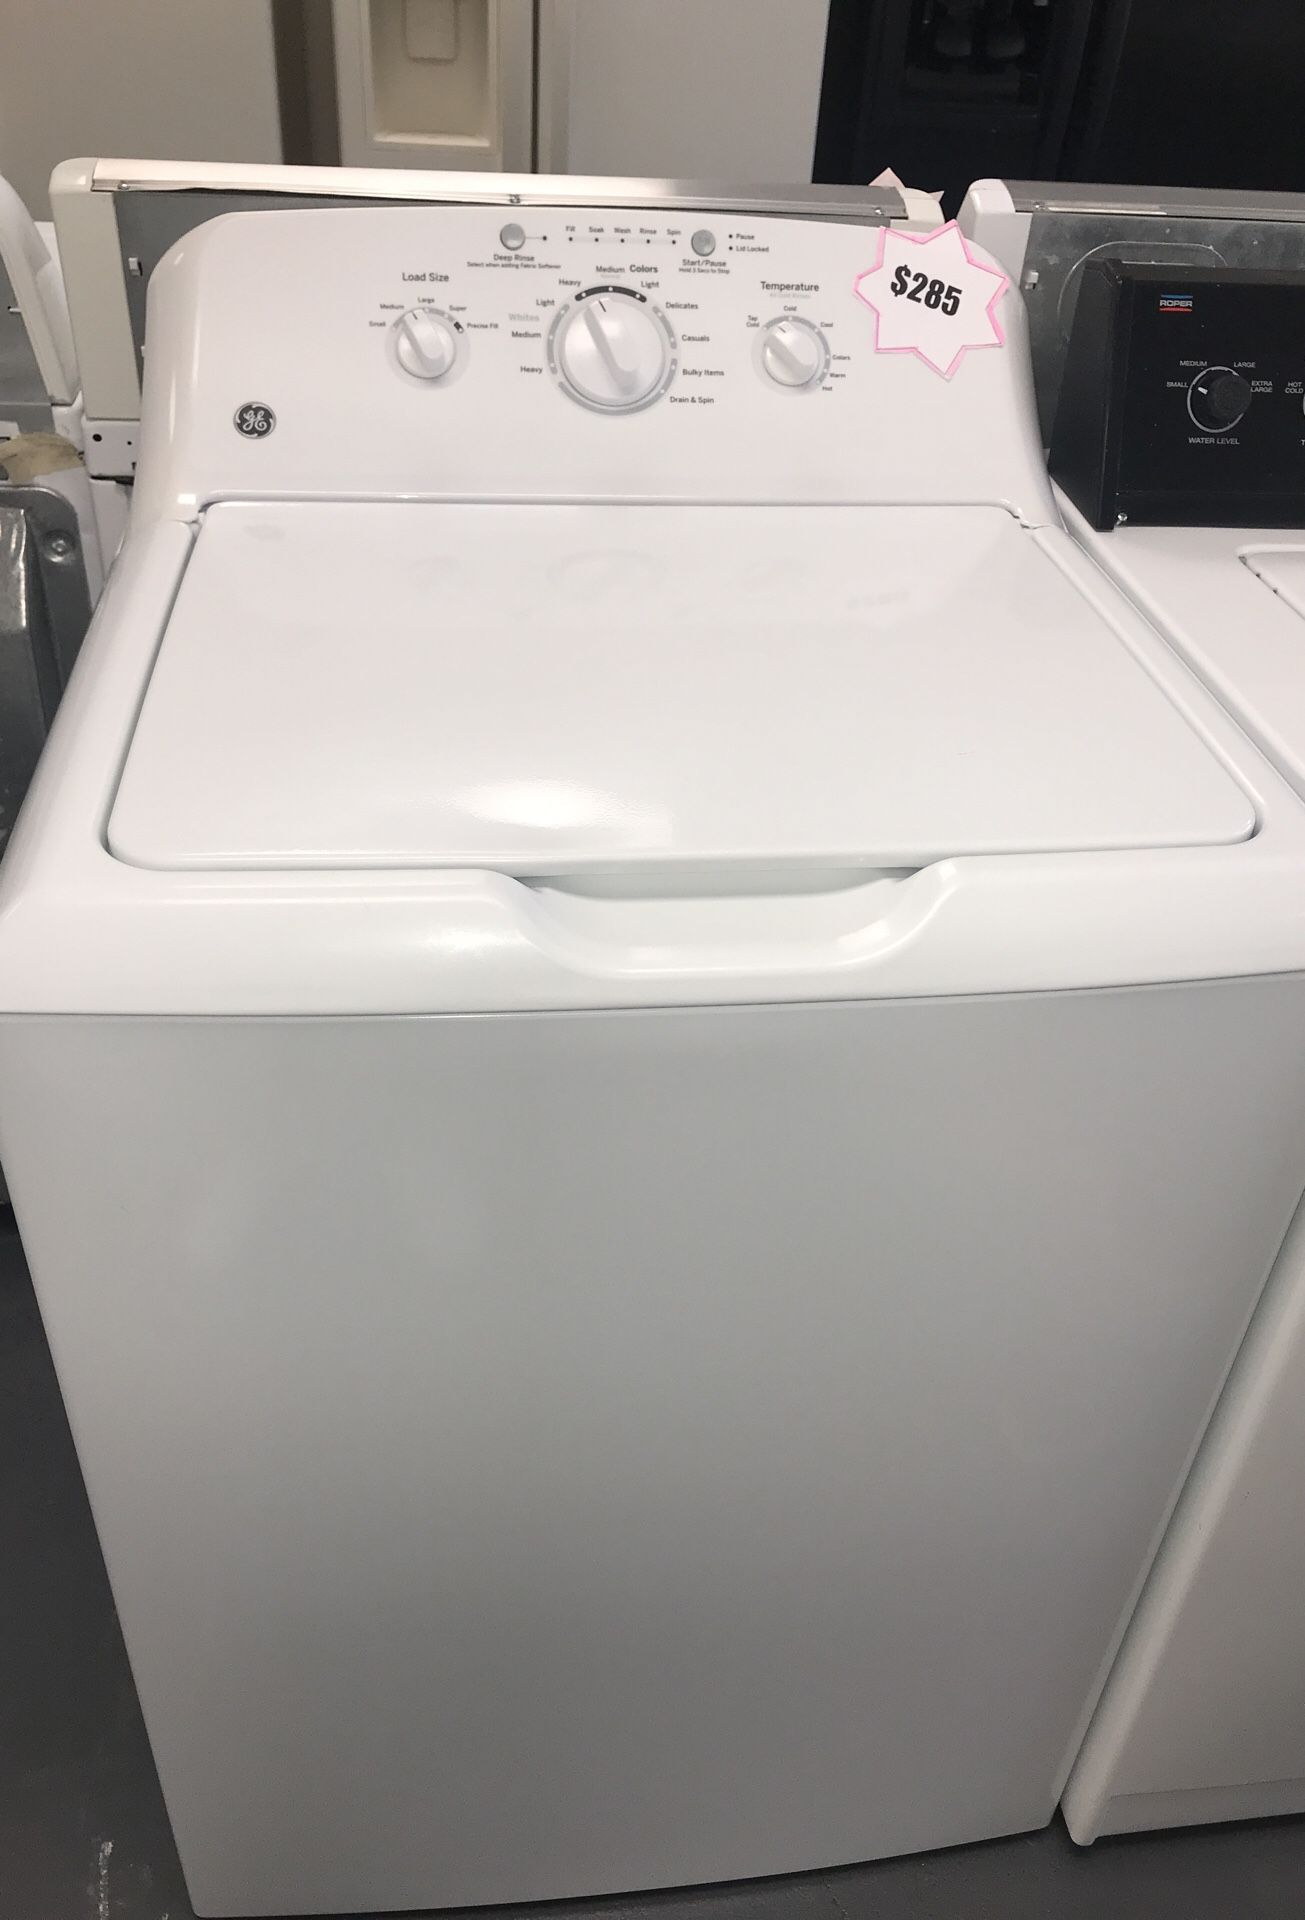 GE washer for sale ! - free delivery